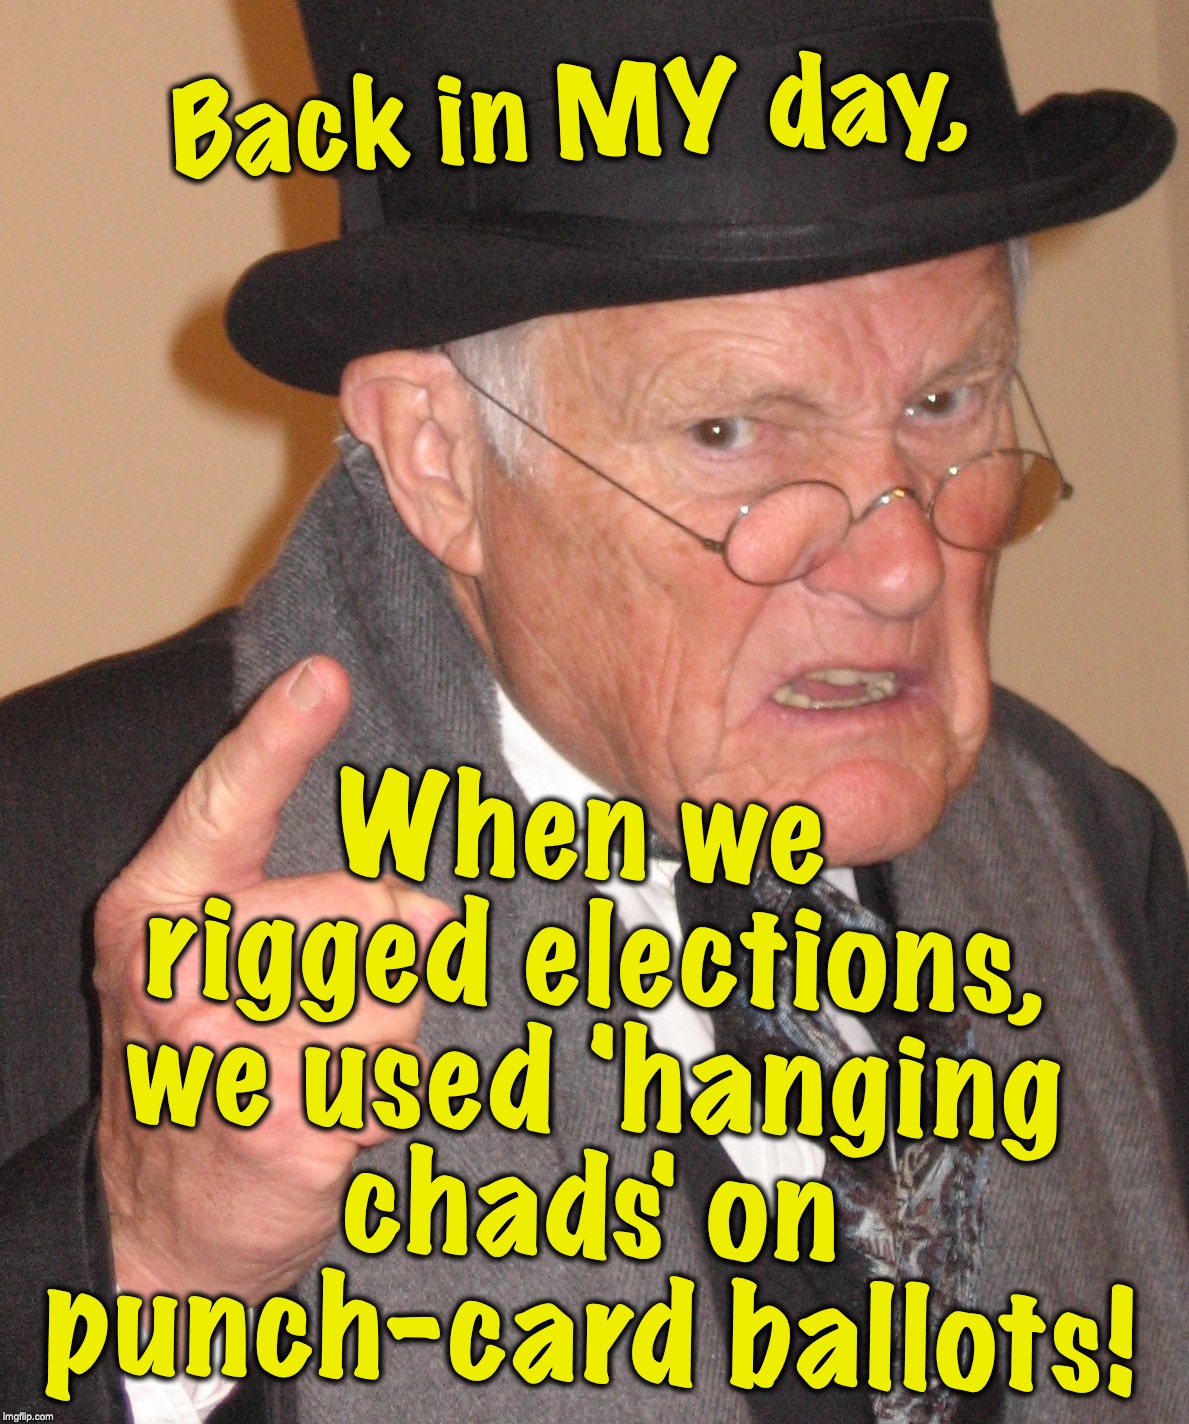 Back in MY day, When we rigged elections, we used 'hanging chads' on punch-card ballots! | image tagged in back in my day 1189x1424 | made w/ Imgflip meme maker